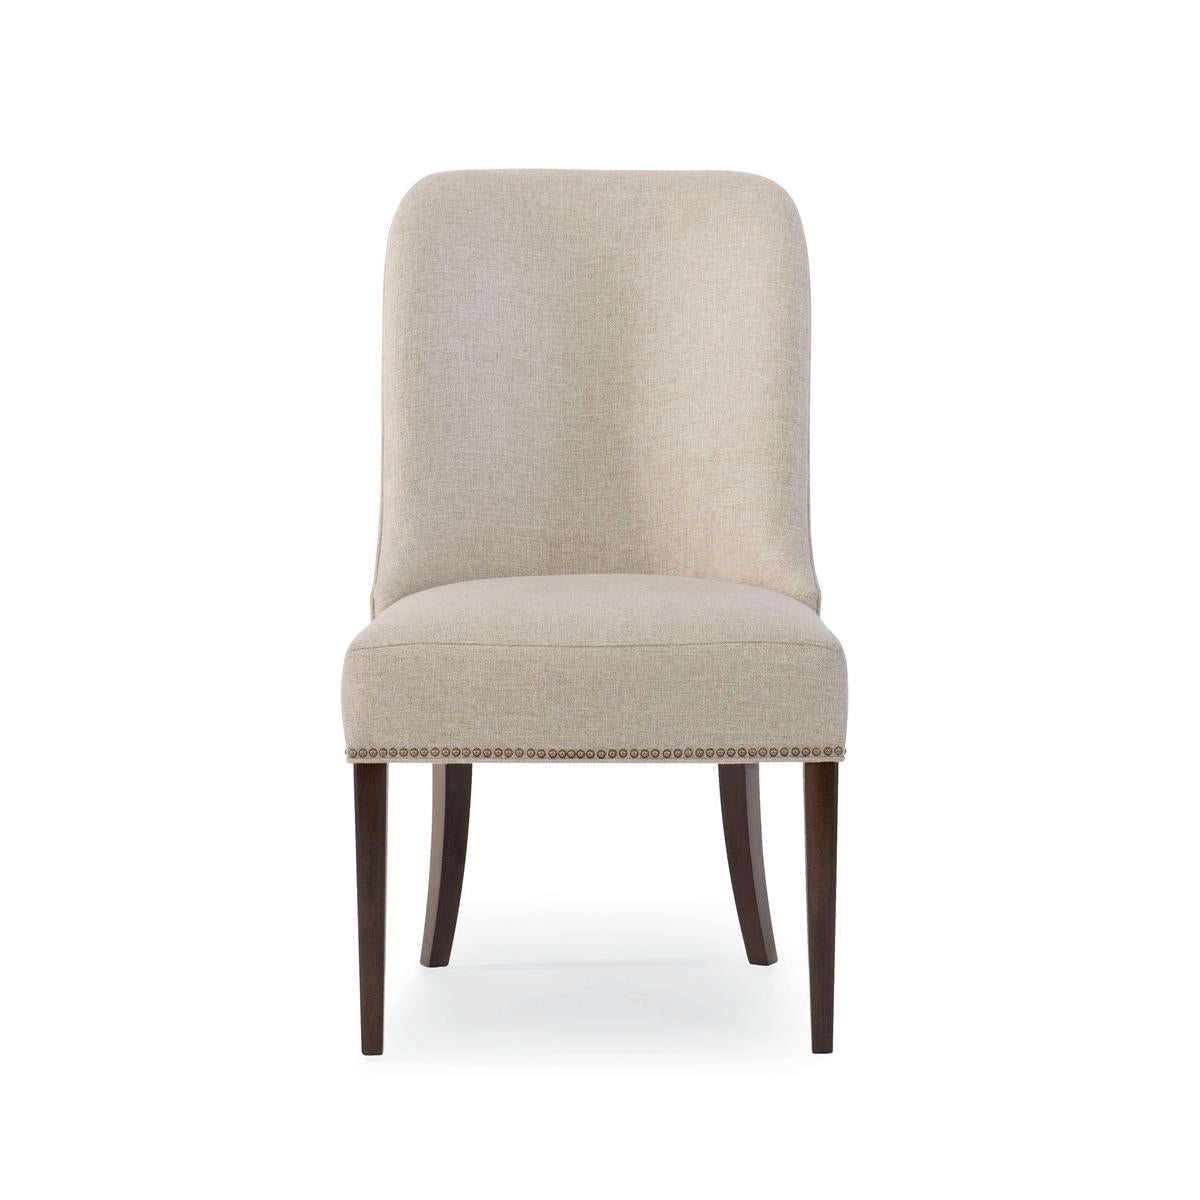 Clean, classic lines, fully upholstered in a neutral brushed fabric, with tapered sabre legs are finished in Bourbon Glaze. With its band of brass nails at the base, these chairs pair well with modern and transitional pieces.

Dimensions: 23